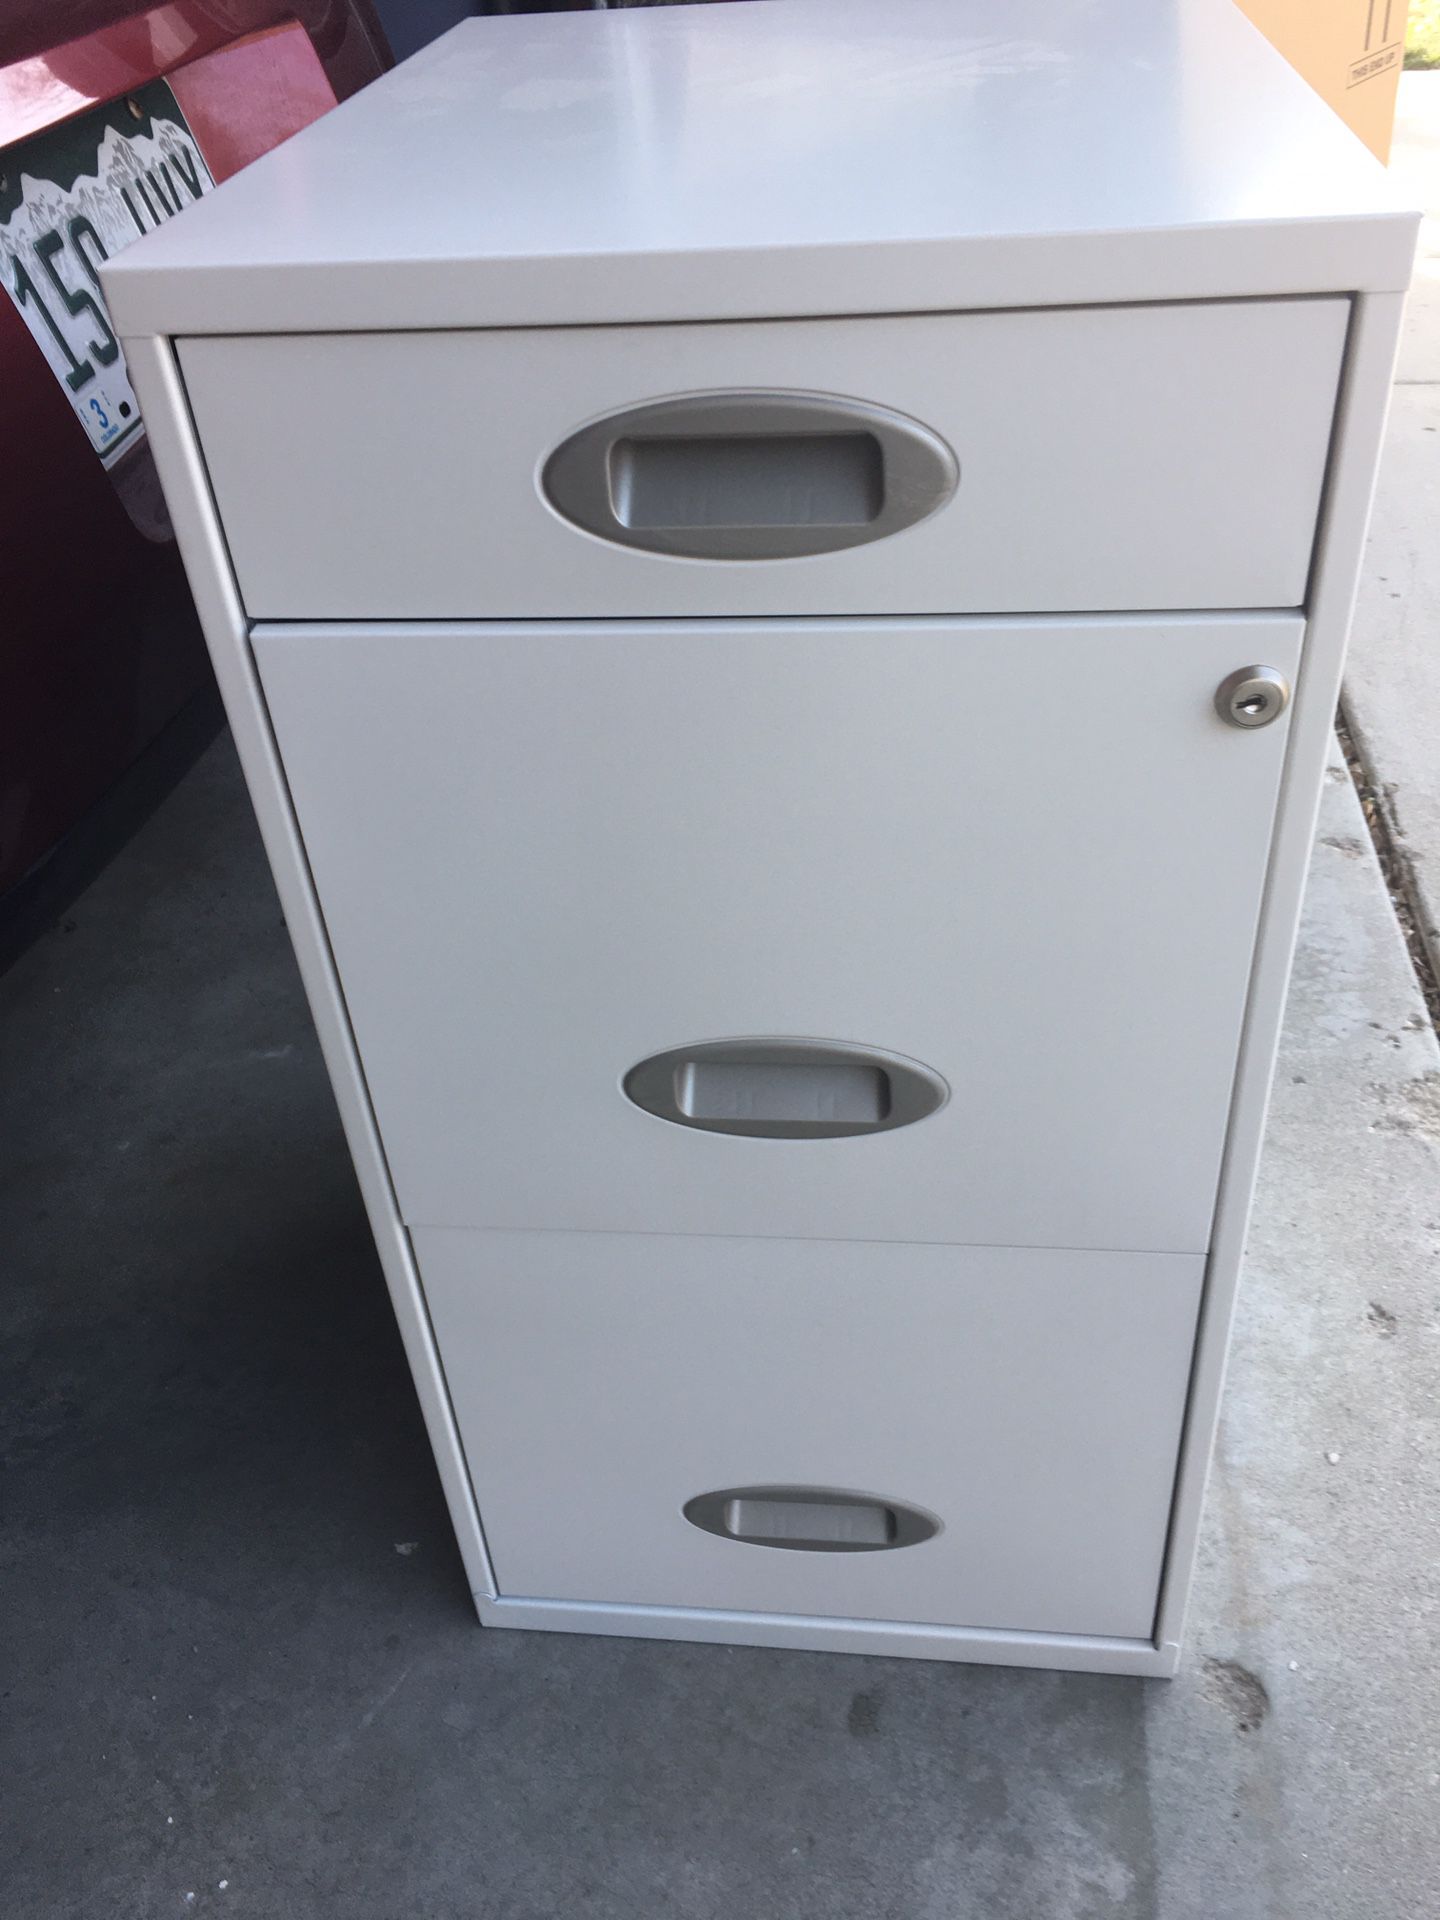 File cabinet Cream (3 drawer) with keys